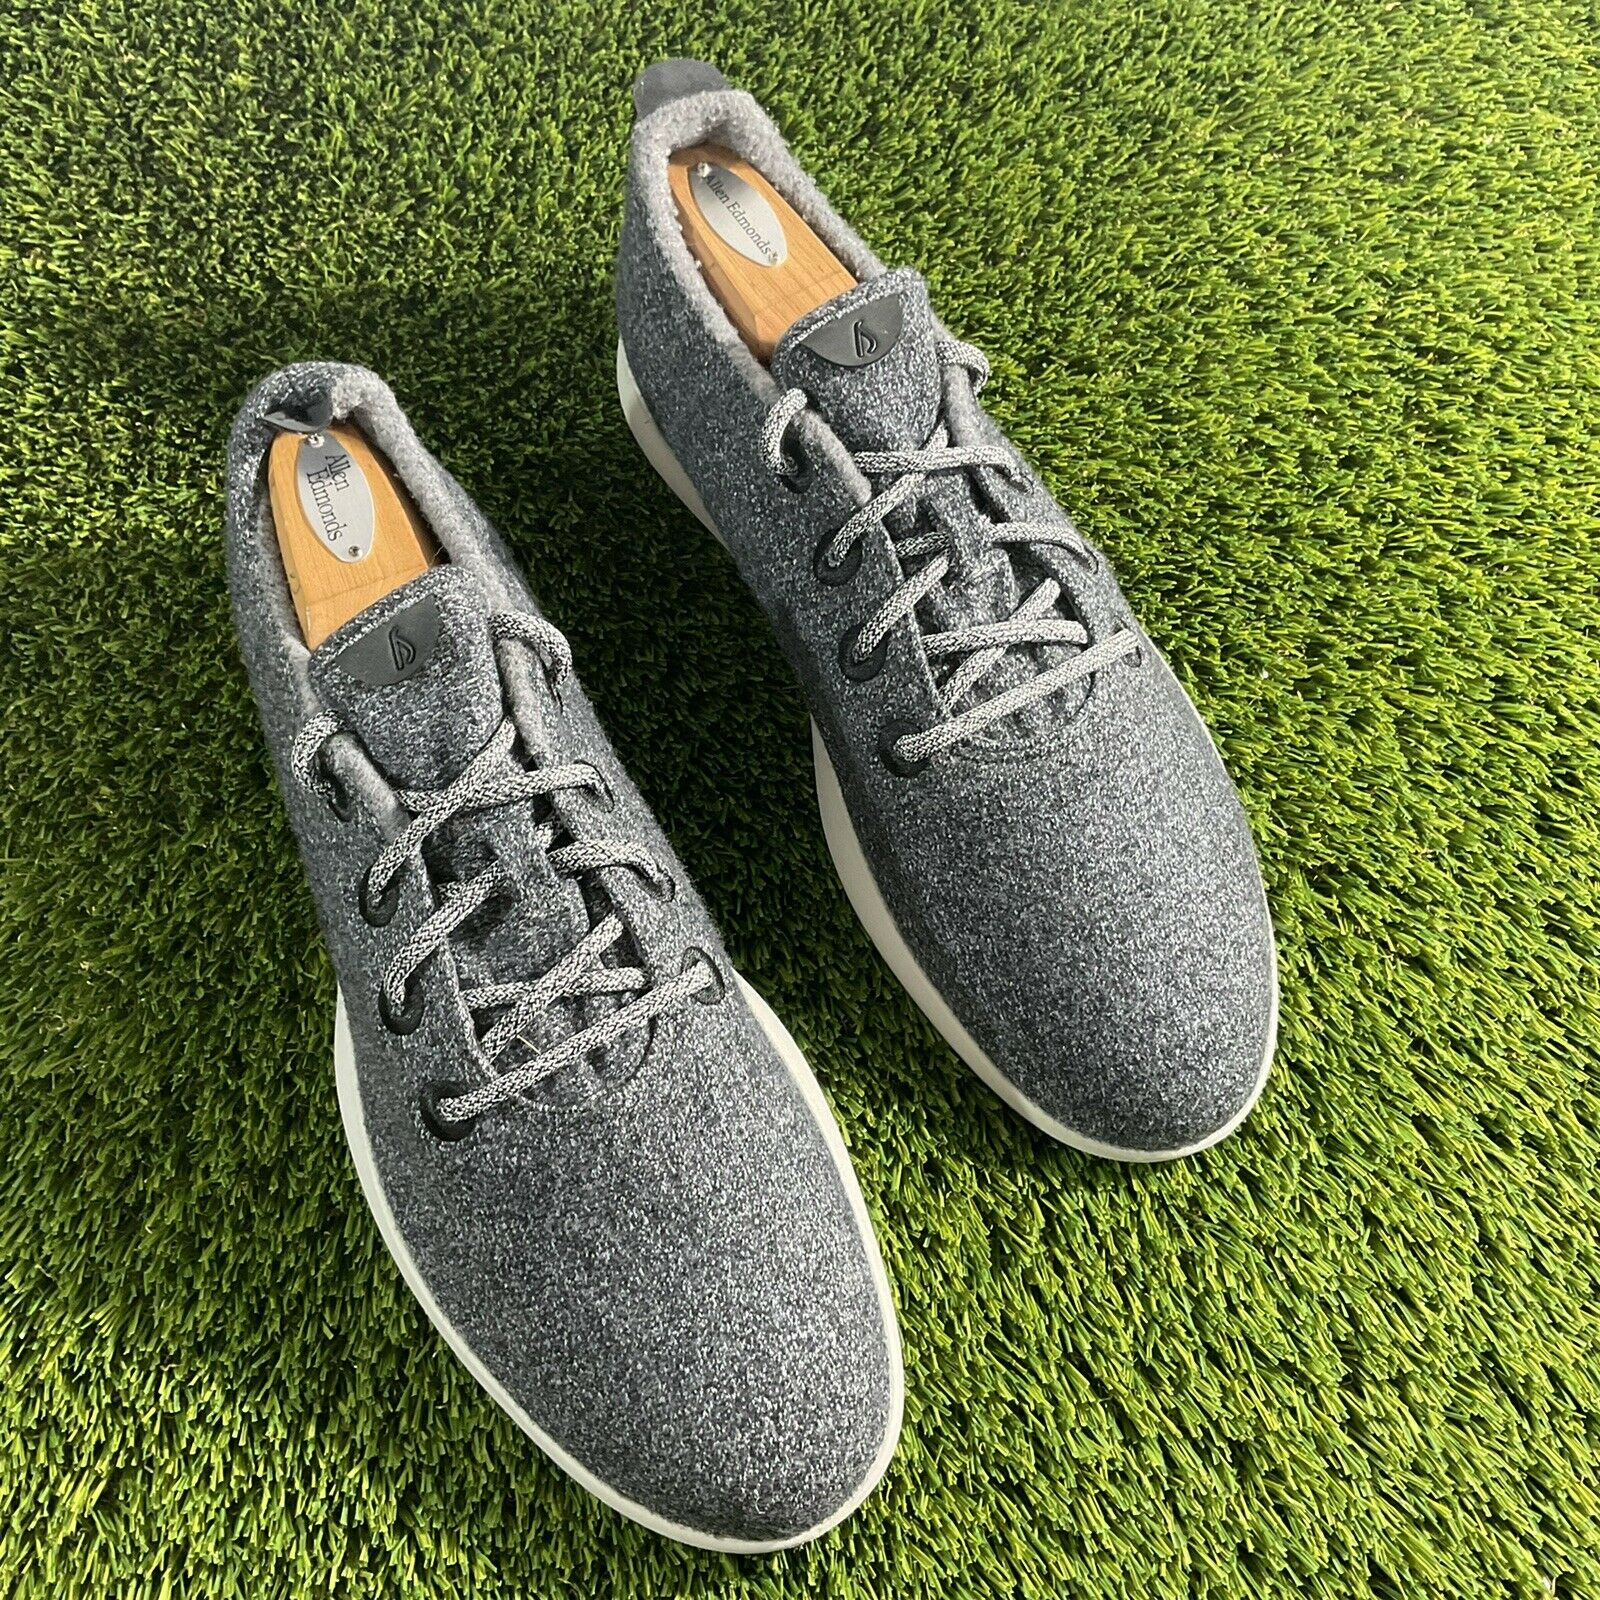 Allbirds Wool Runners Shoes Men's Size 14 Running Walking Shoes Heathered Gray